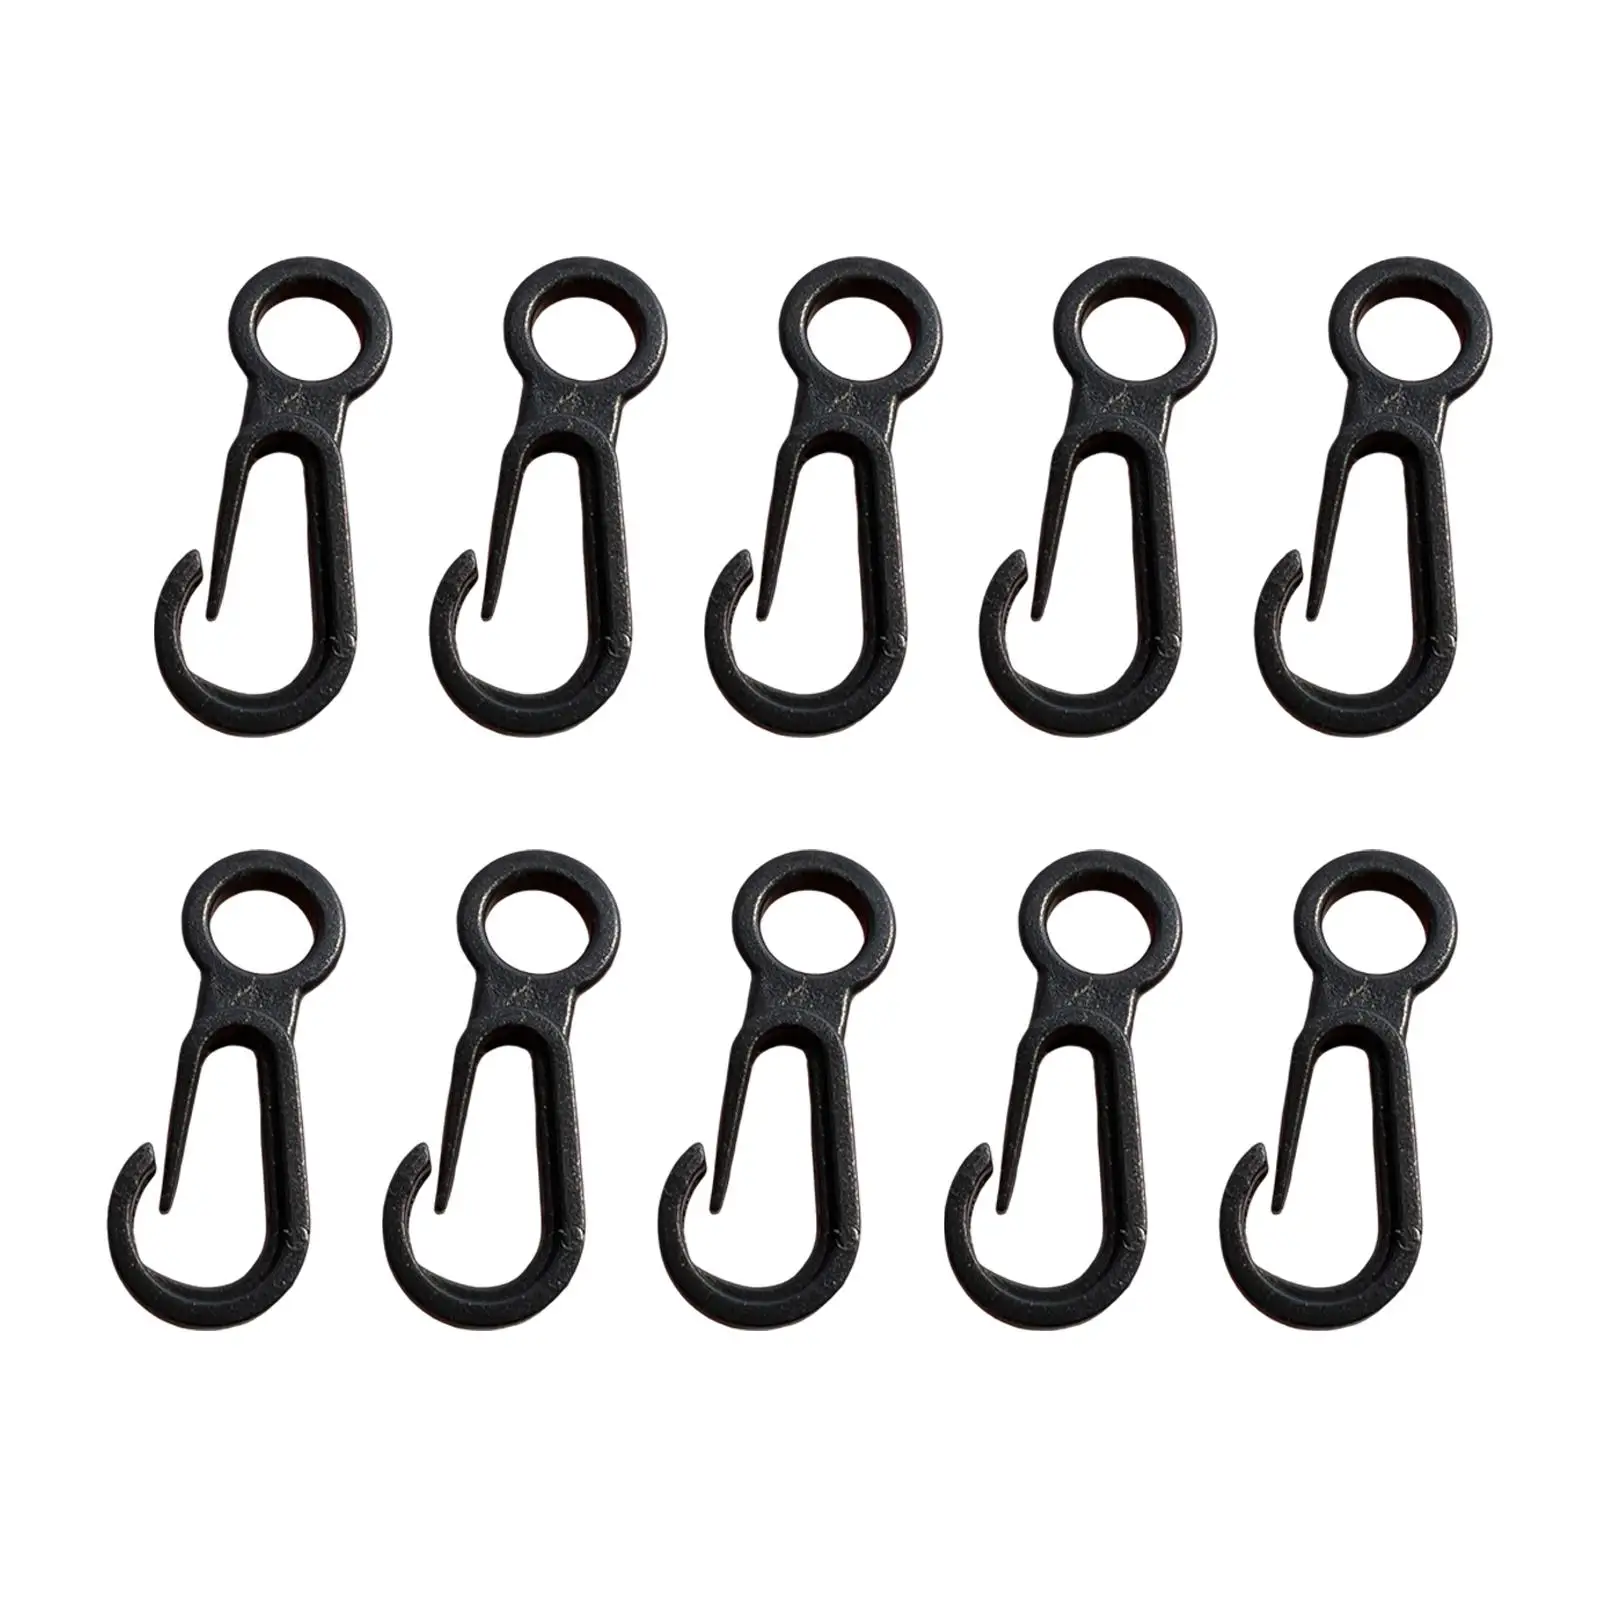 10 Pieces Camping Lantern Hanging Hooks Portable Inner Tent Snap Hooks Quick Release Pocket with Hole for Camping Hiking